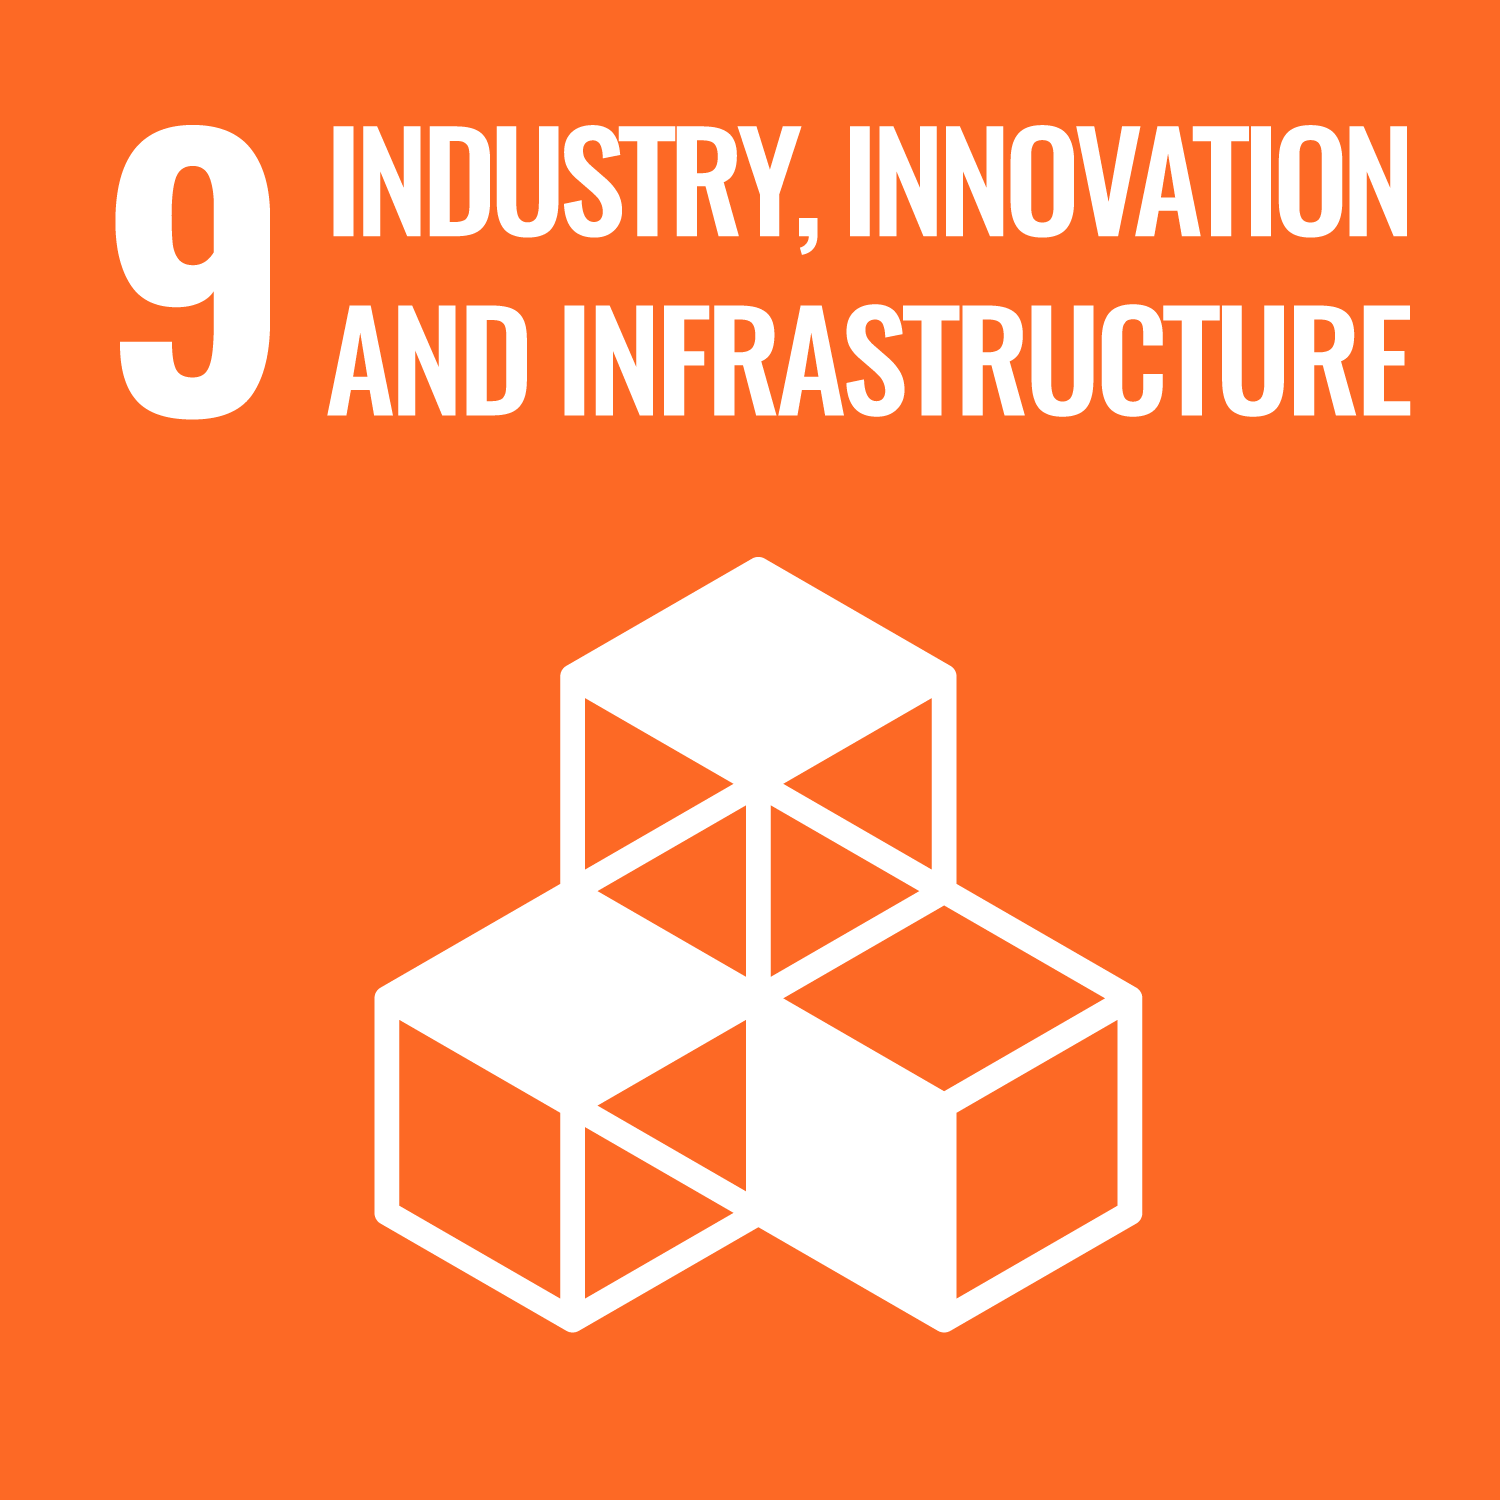 9 INDUSTRY, INNOVATION AND INFASTRACTURE